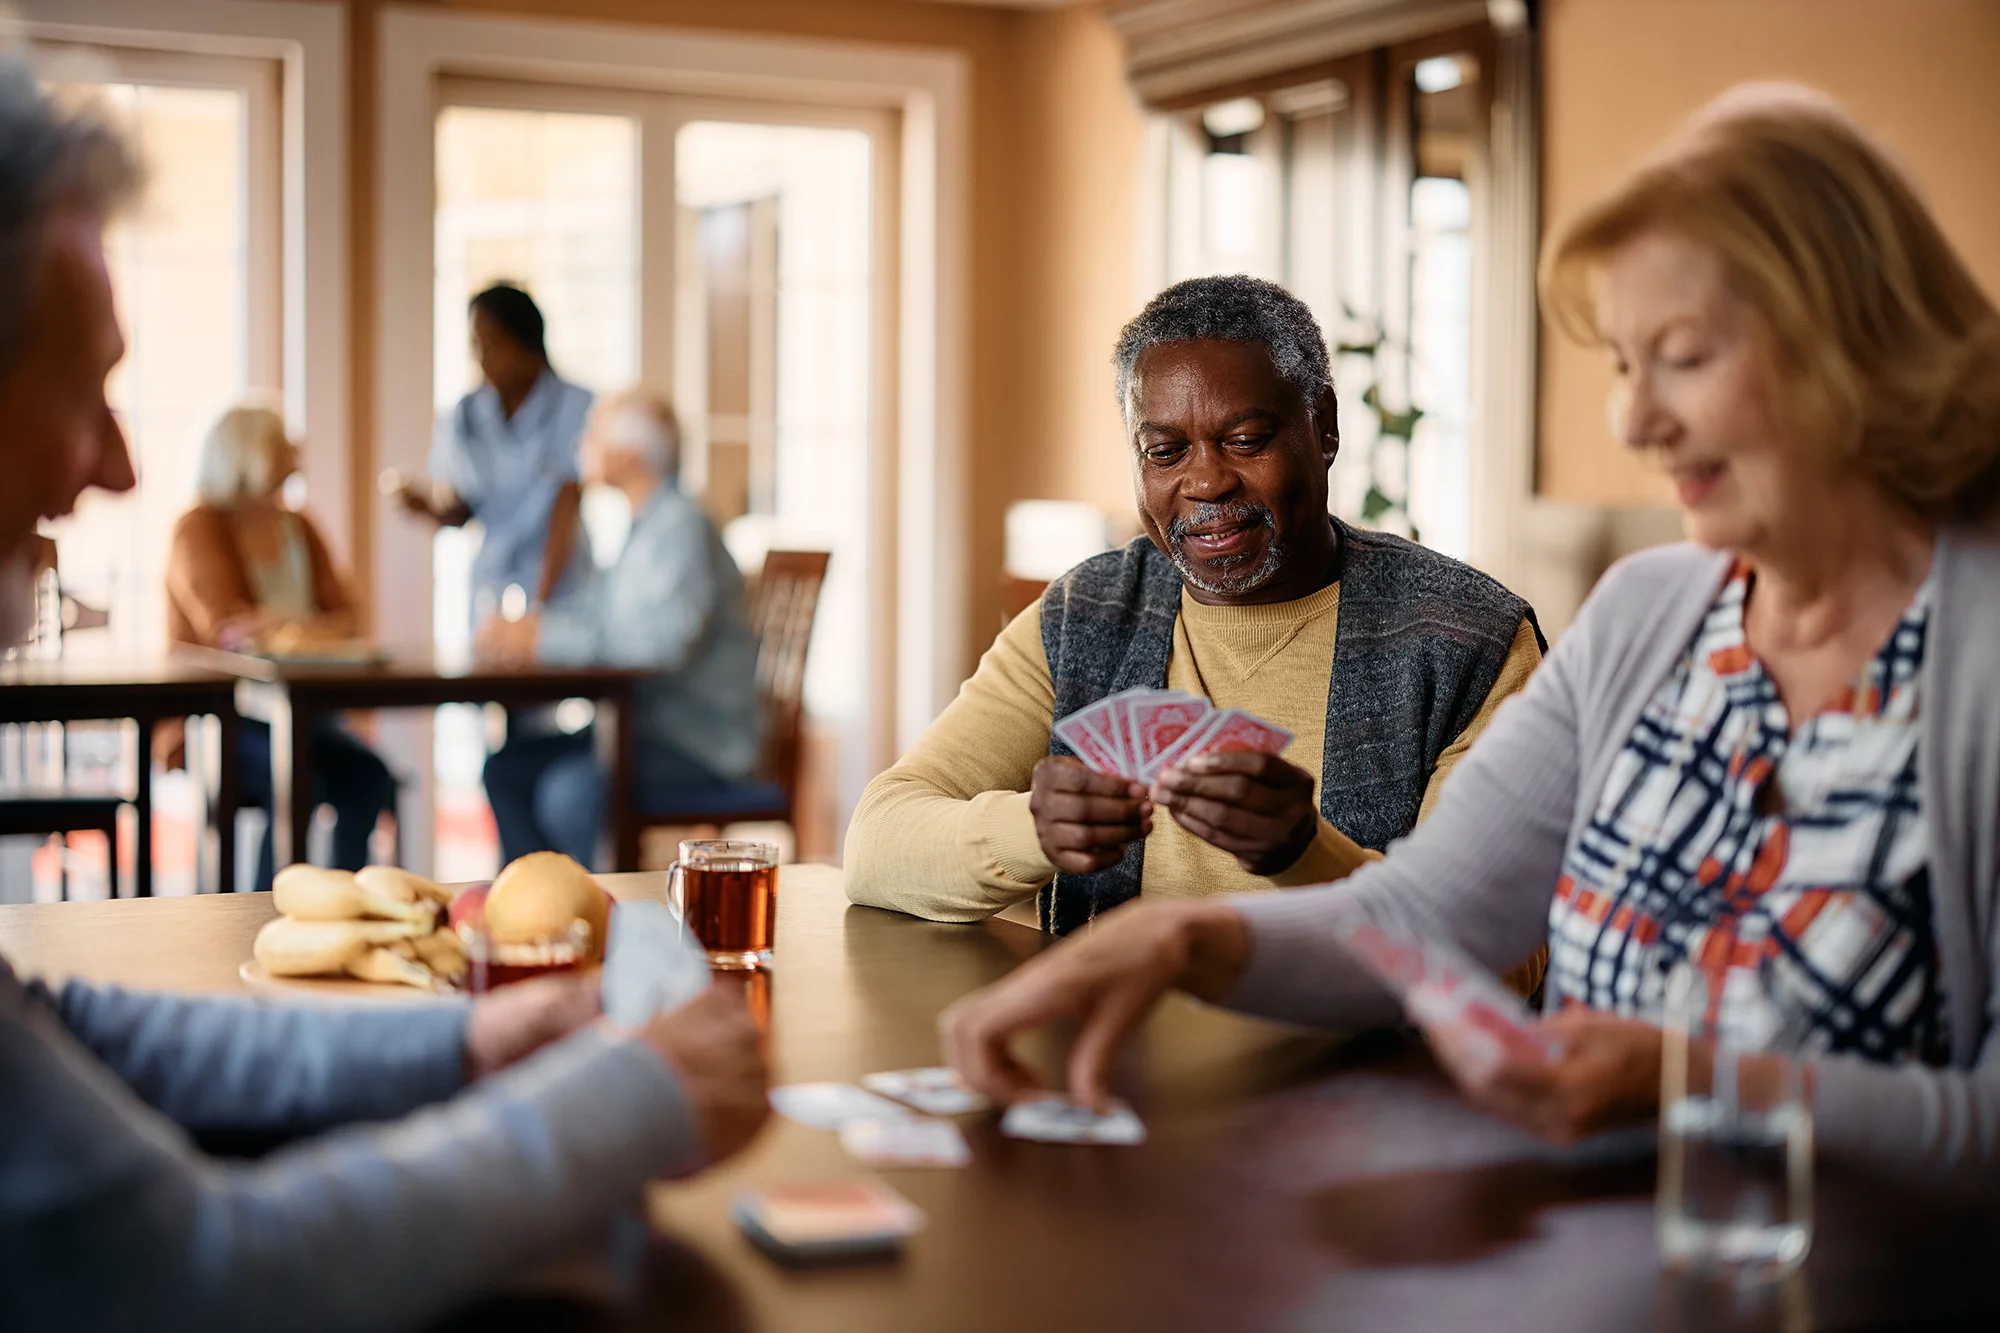 Senior Living Community Options: Which Is the Best? 